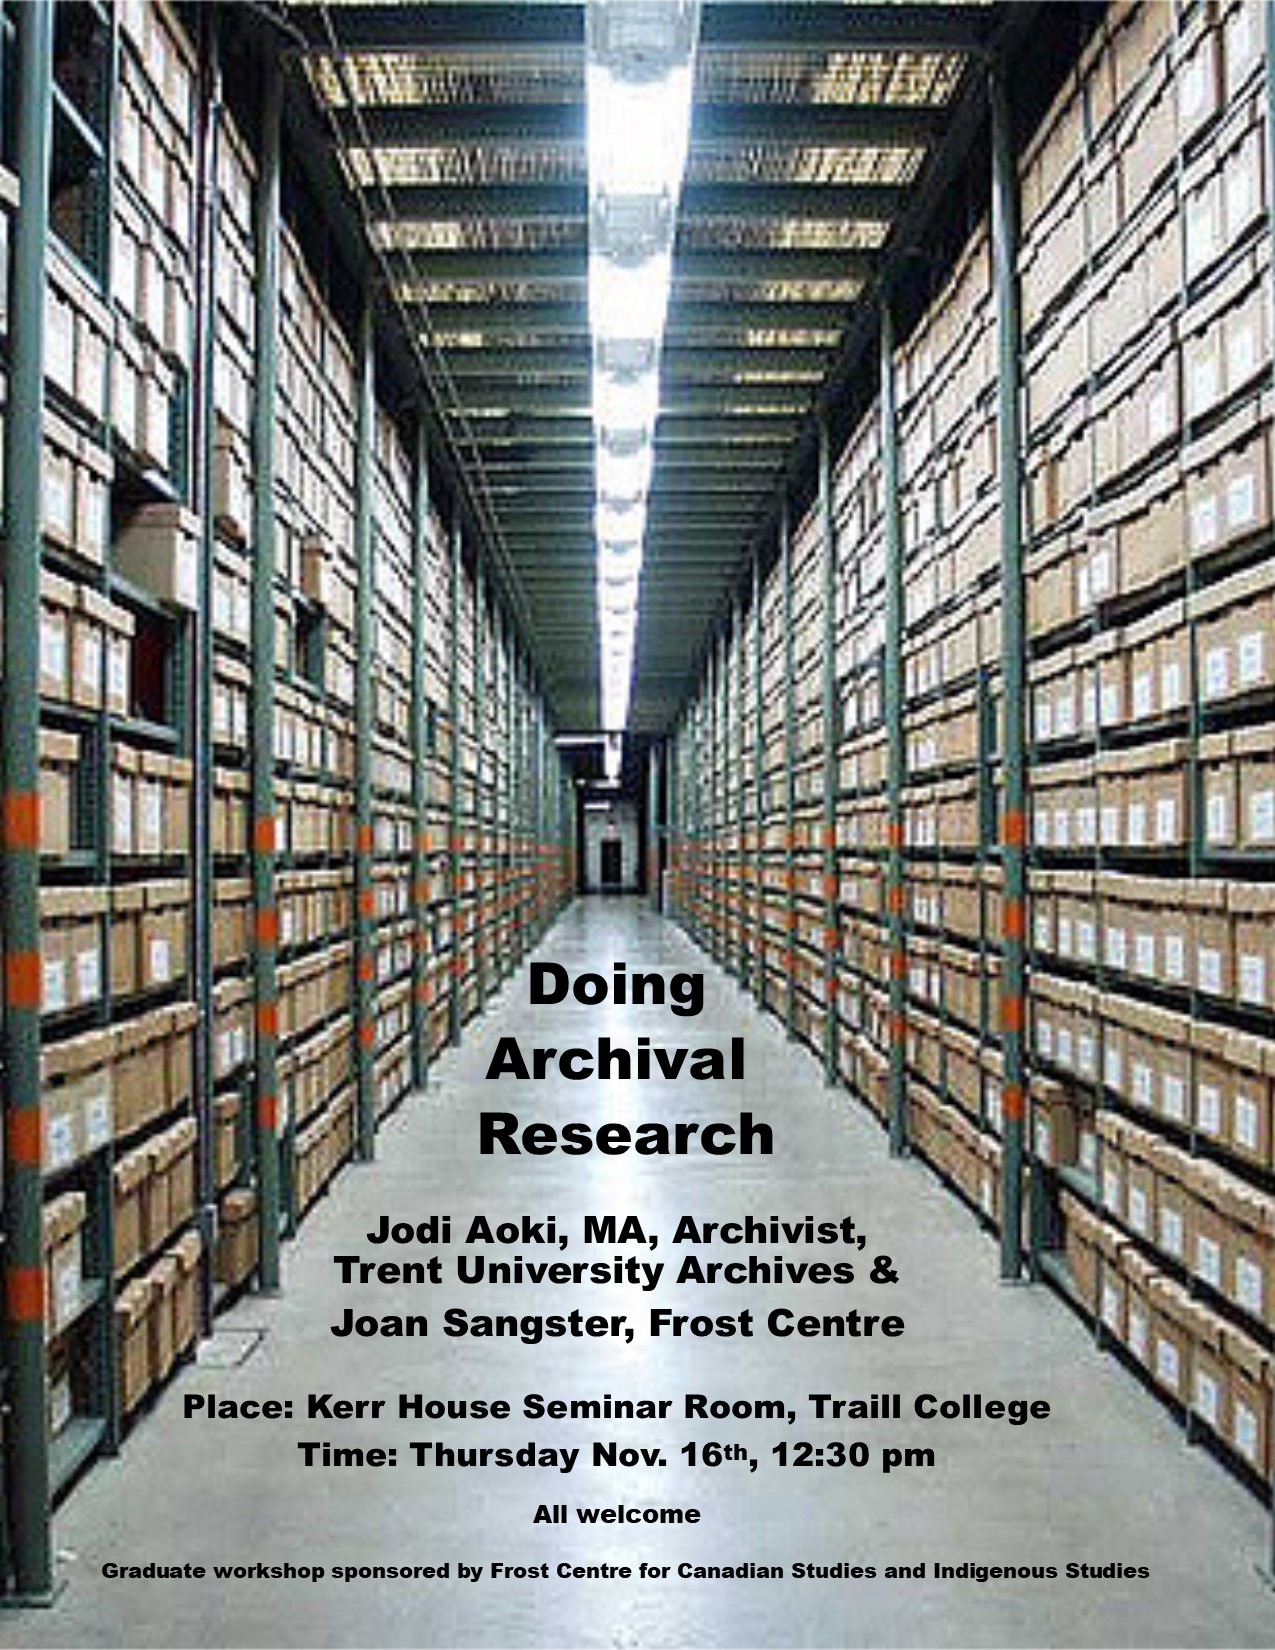 Doing Archival Research with Jodi Aoki & Joan Sangster 16 November 2017